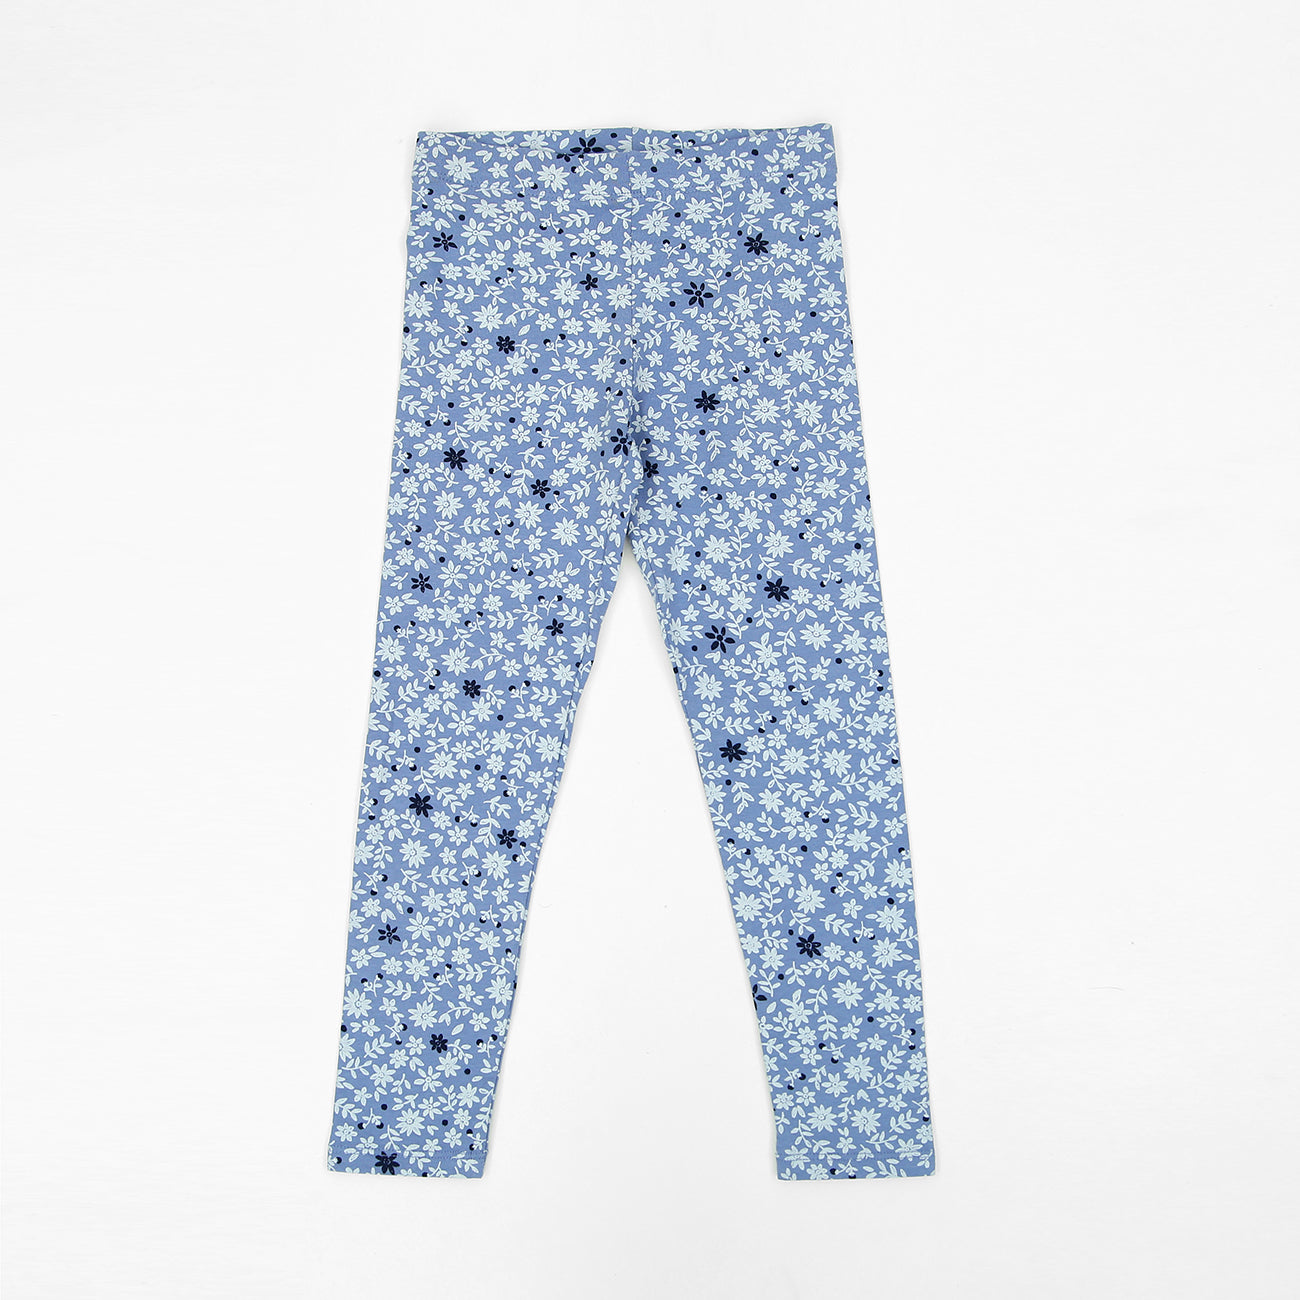 Imported All-Over Floral Printed Soft Cotton Stretch Legging For Girls (11579)